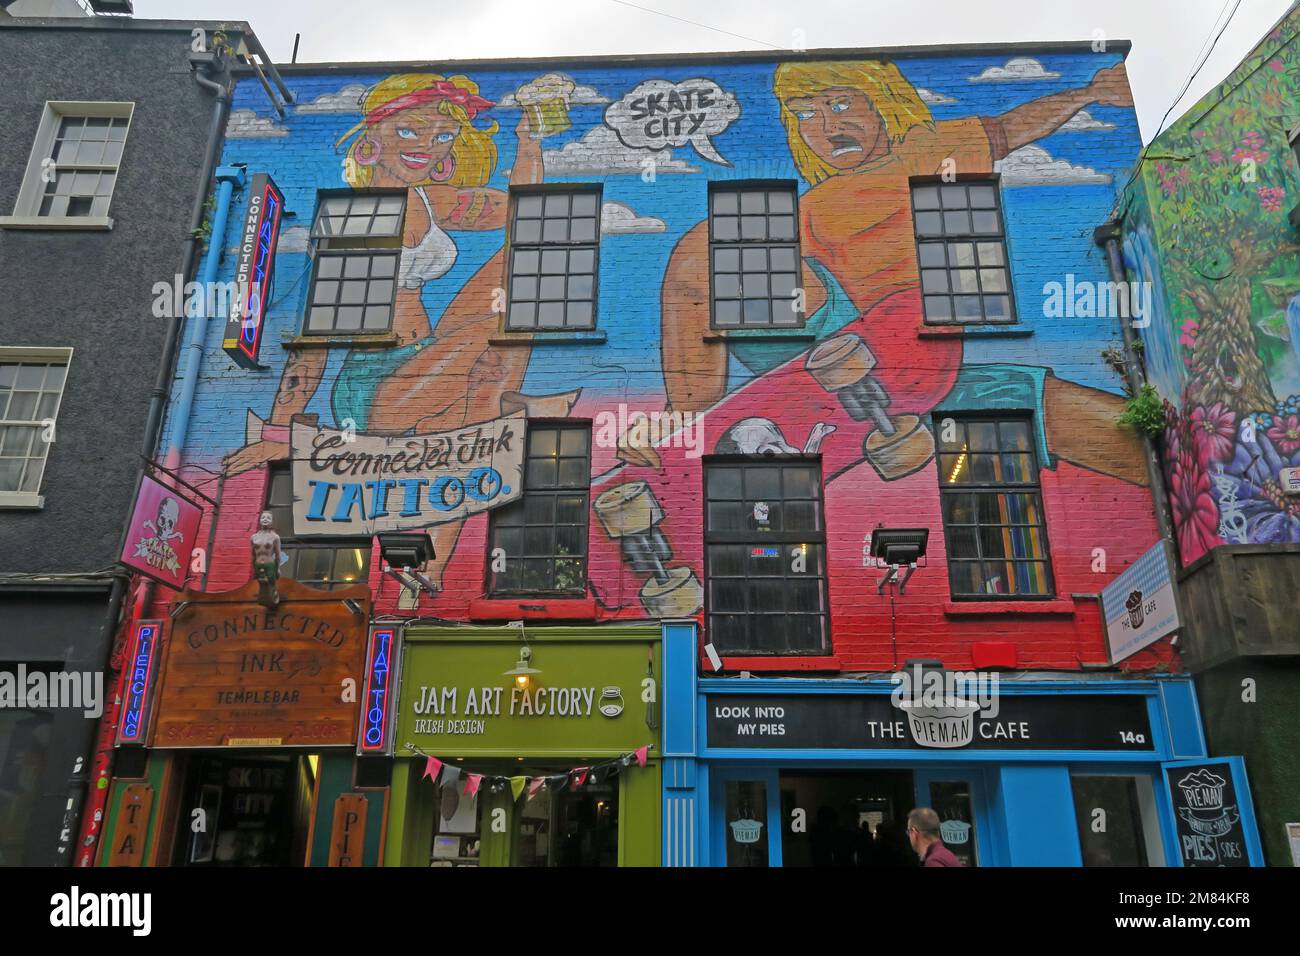 Jam Art Factory, Skate City, Connected Ink Tattoo, The Pieman Cafe - 14A Crown Alley, Temple Bar, Dublin 2, D02 RX36, Eire Stockfoto